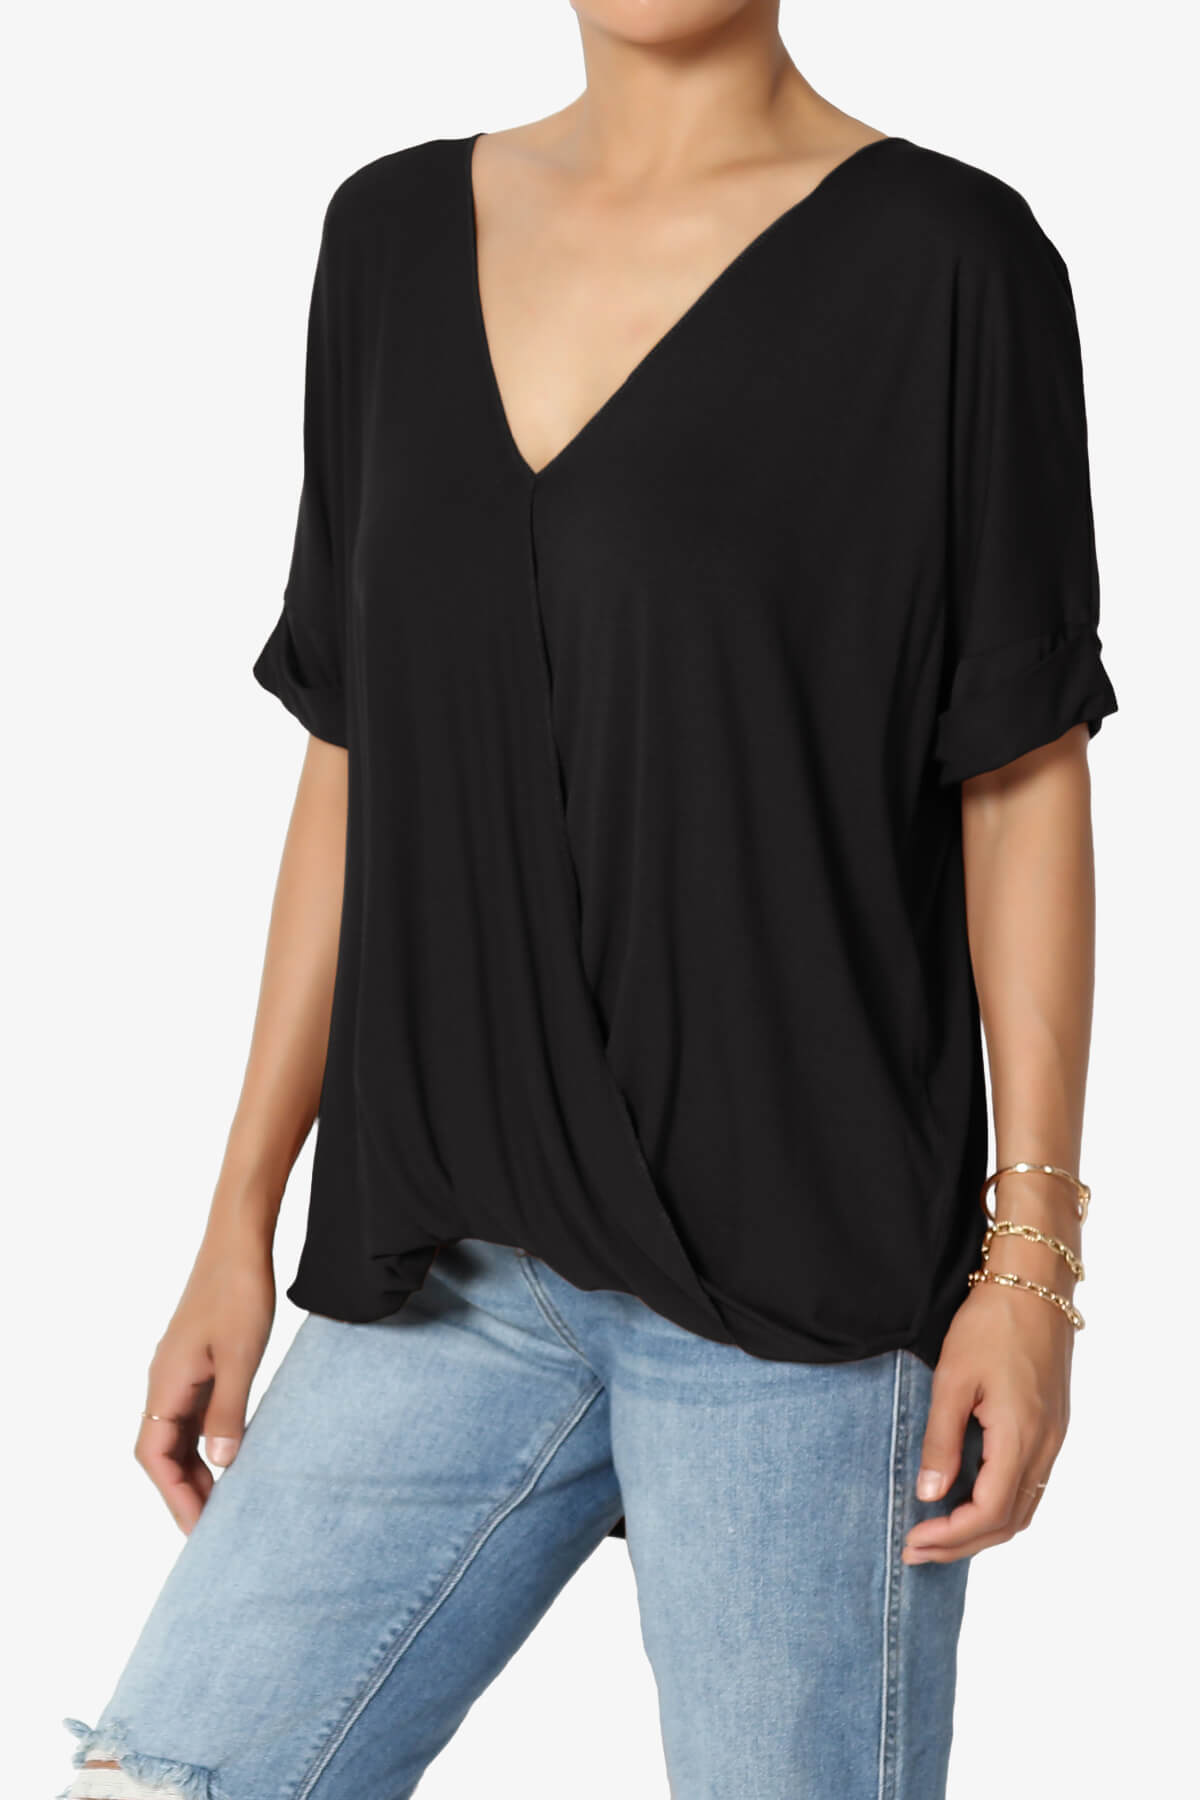 Load image into Gallery viewer, Tackle Wrap Hi-Low Crepe Knit Top BLACK_3
